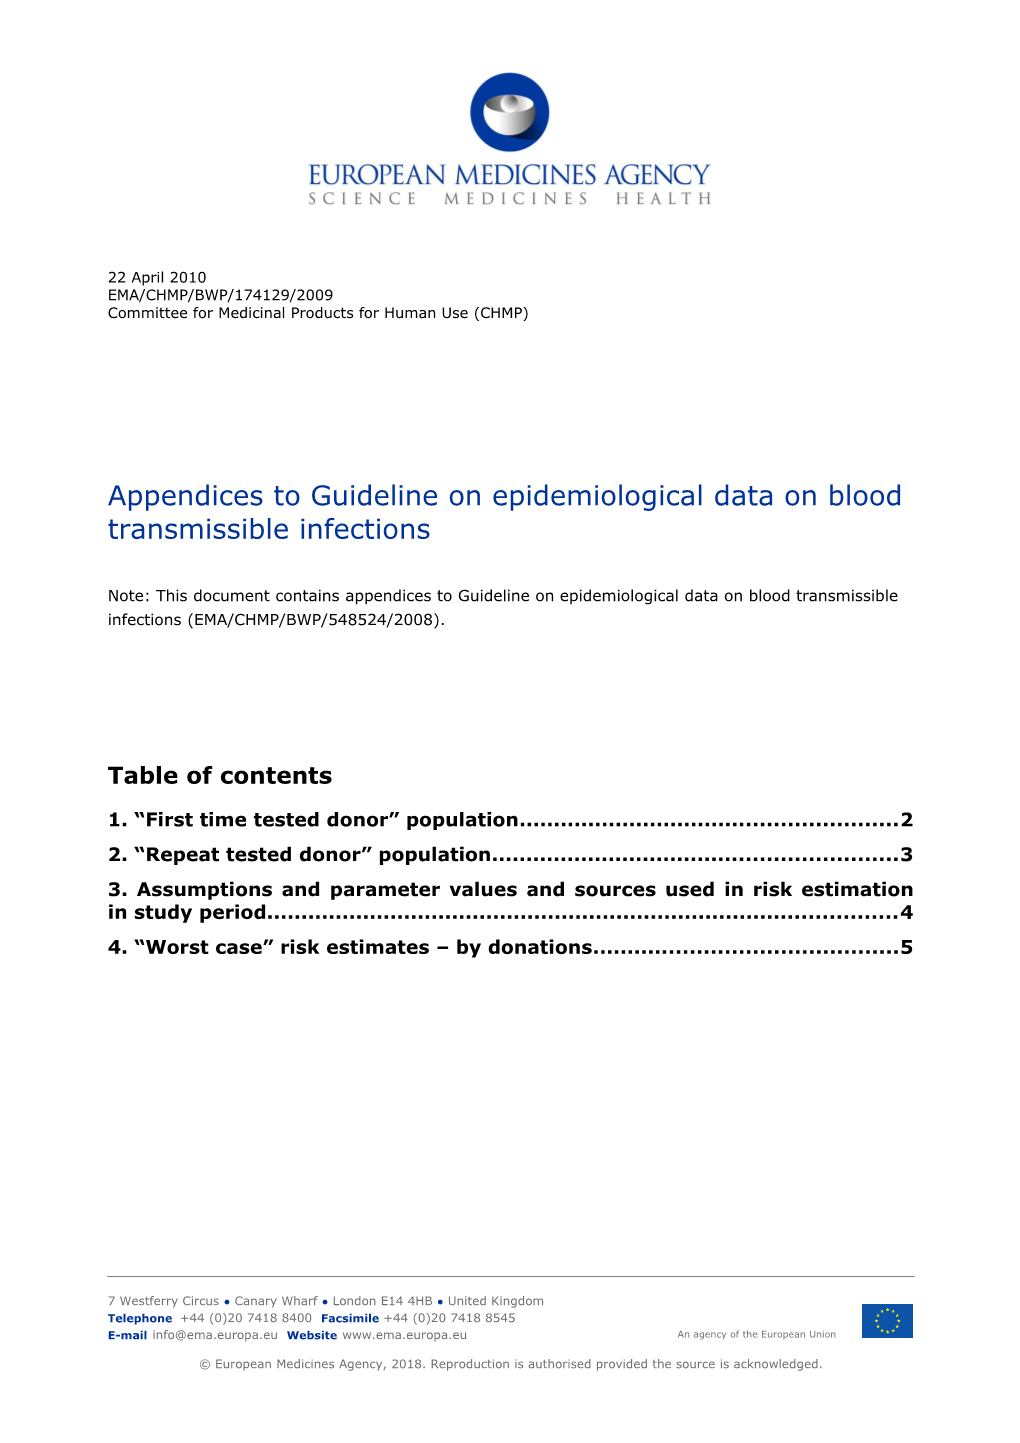 Appendices to the PMF Epidemiology Guideline Rev. 1